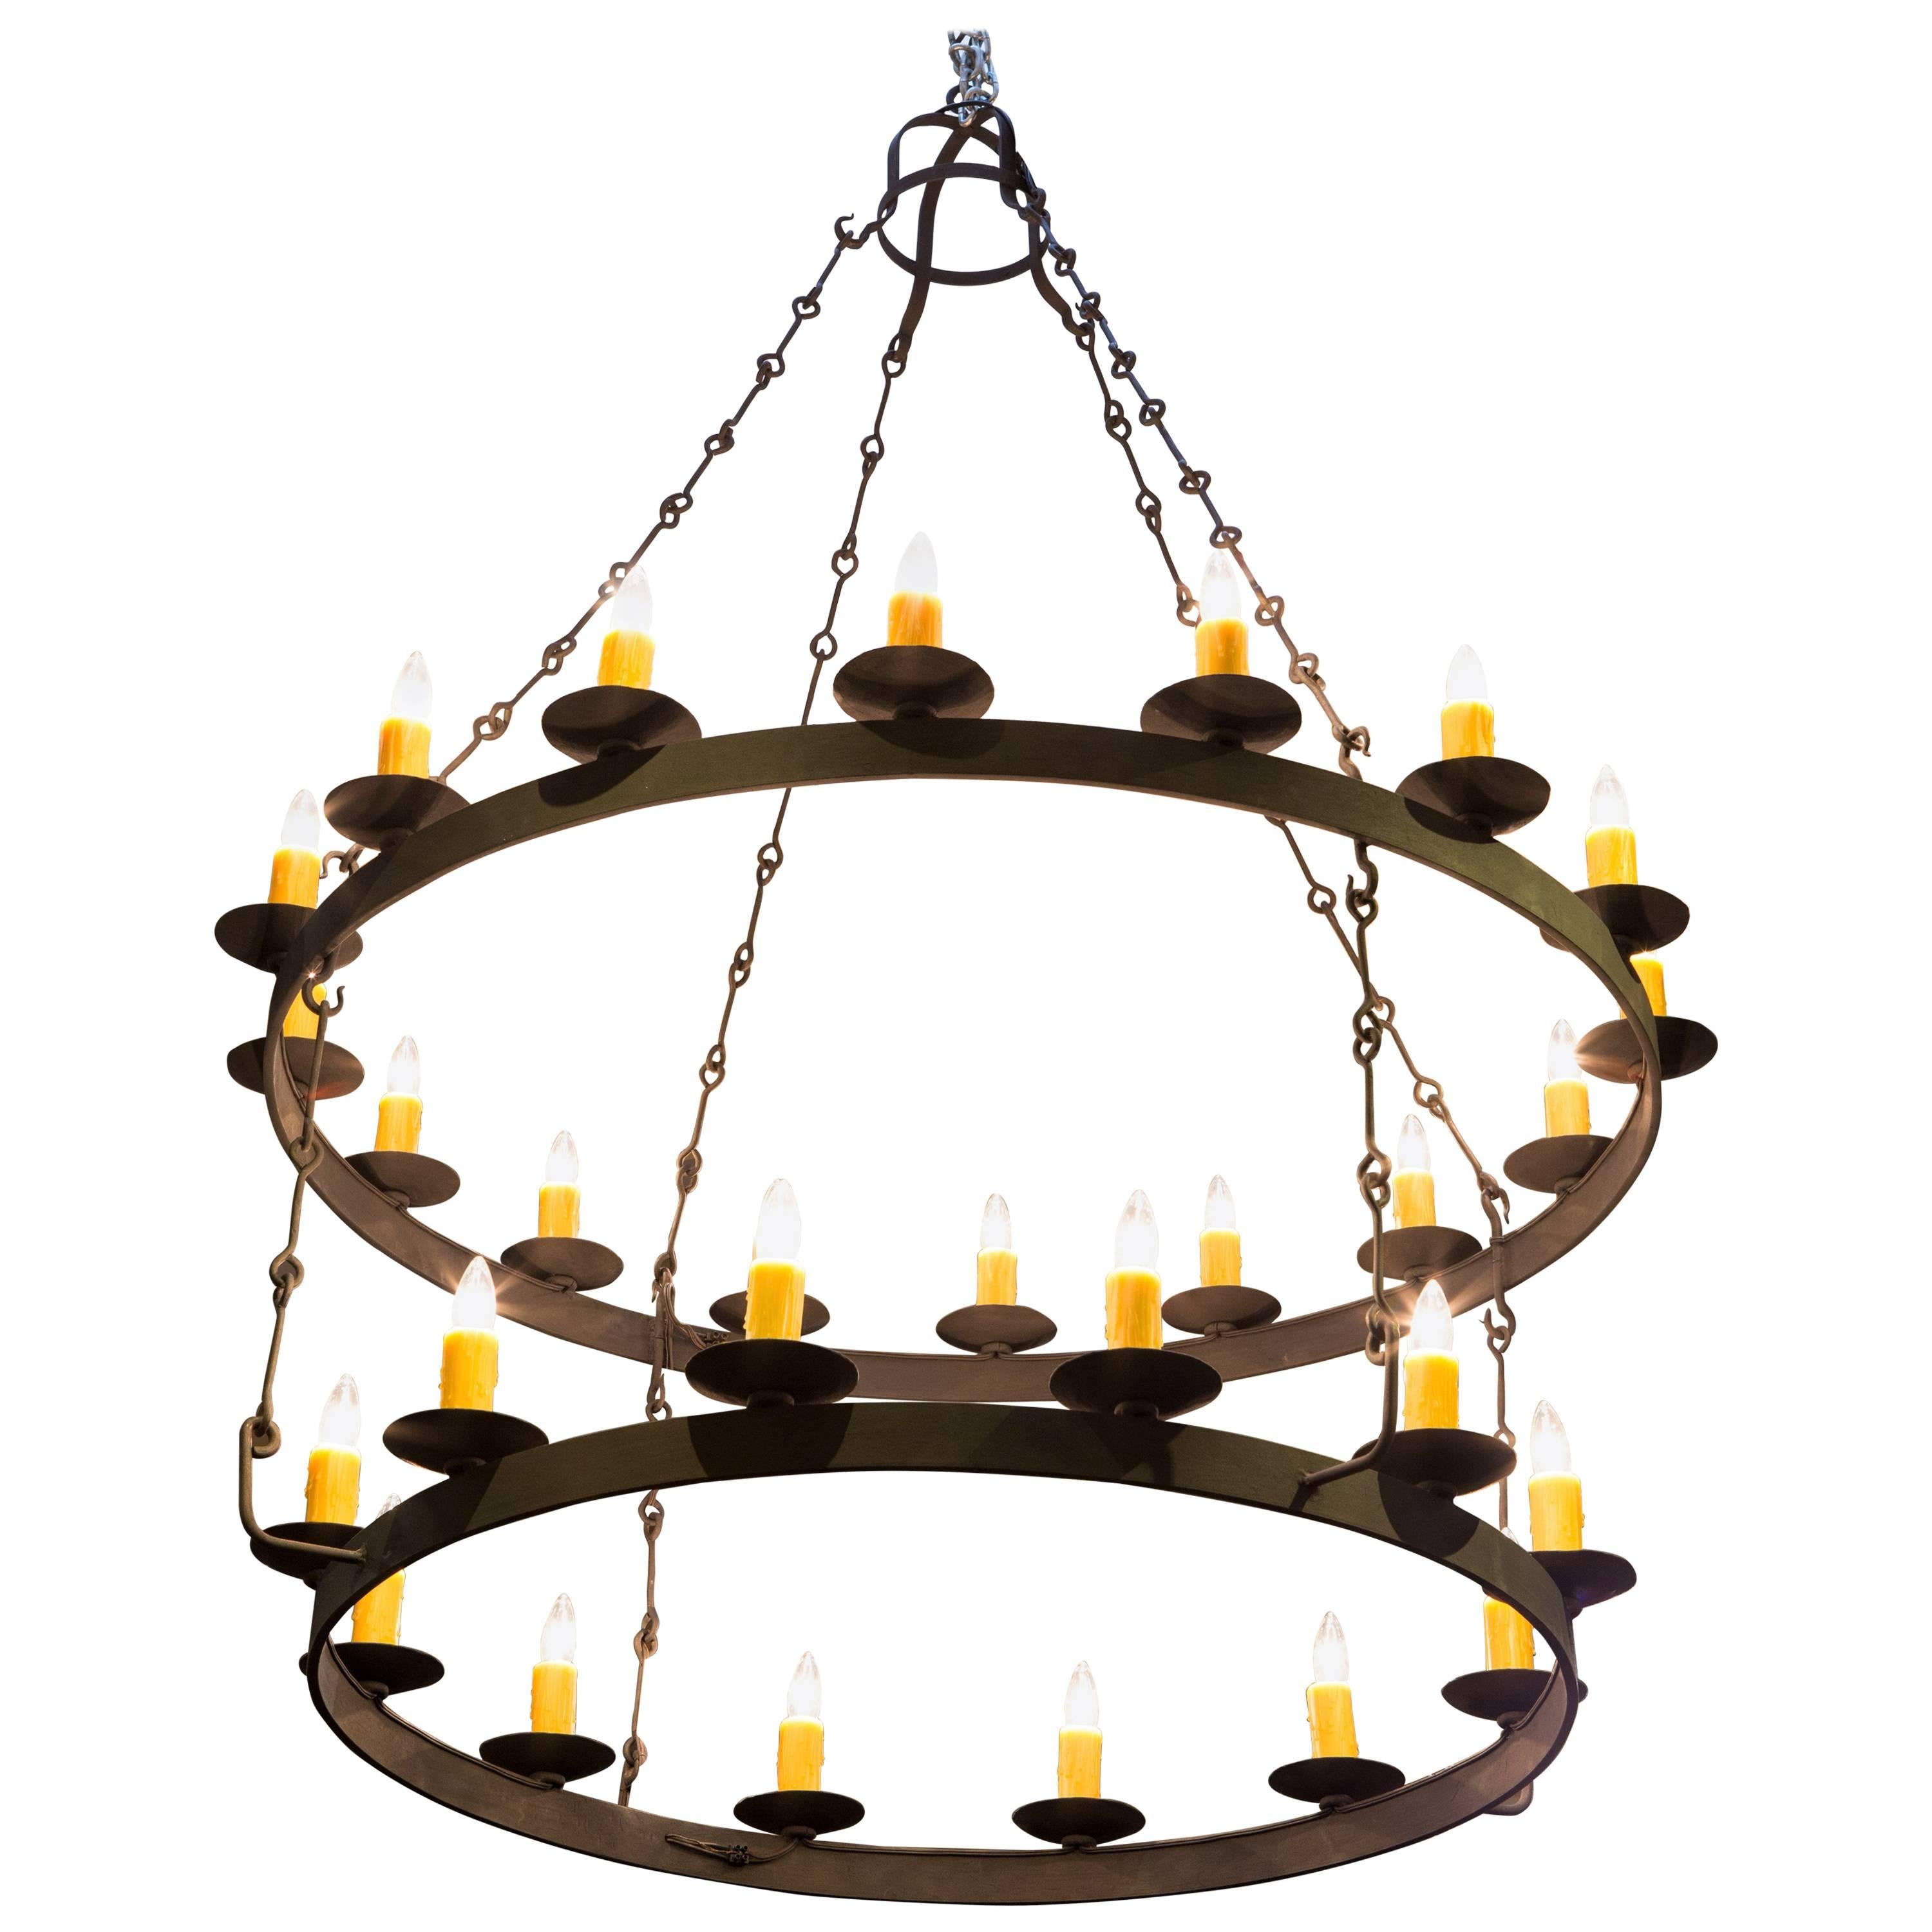 Massive Hand-Forged Iron Double Ring "Monroe" Chandelier with 28 Sockets For Sale